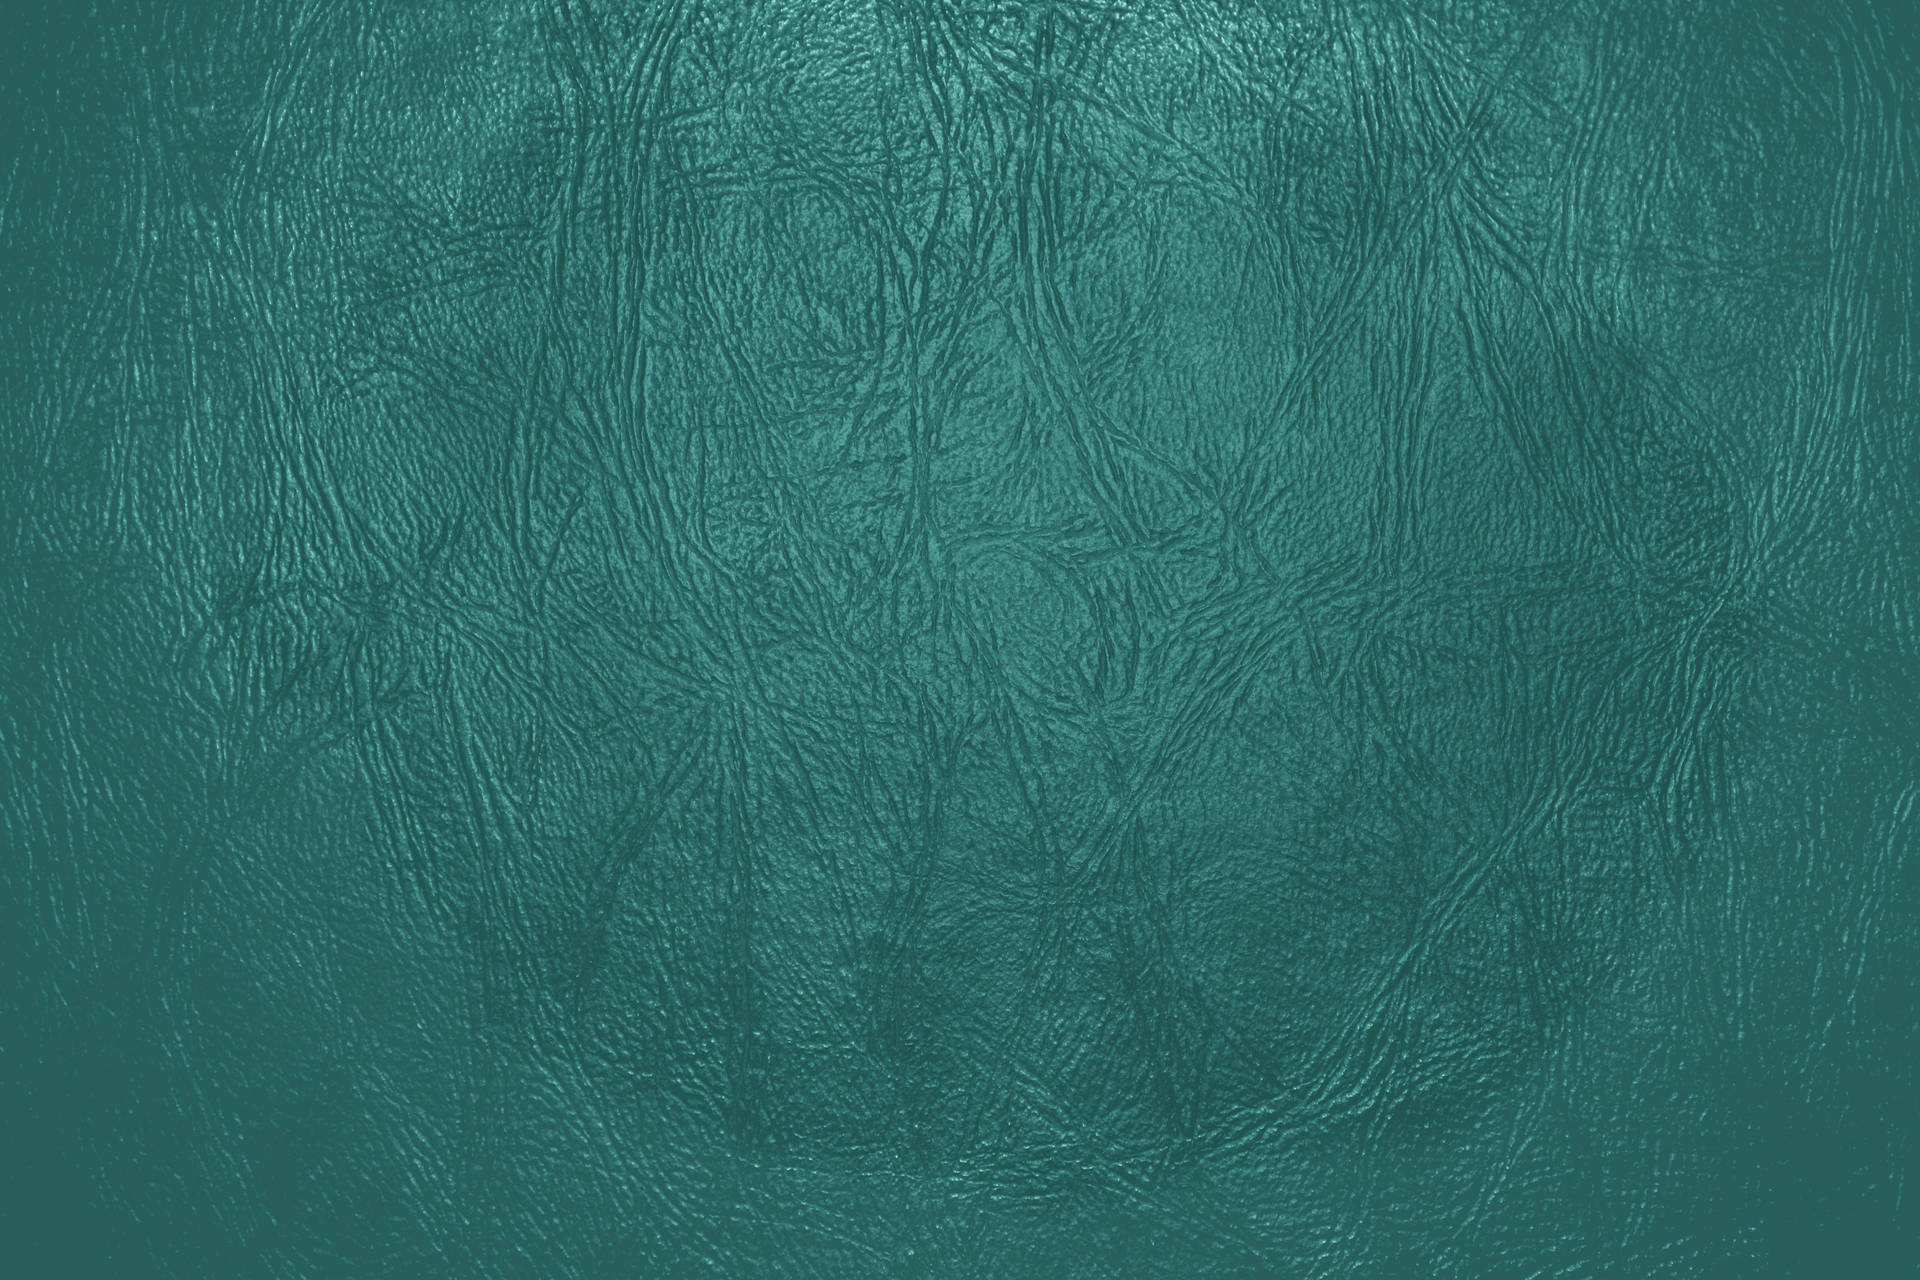 Teal 3888X2592 Wallpaper and Background Image